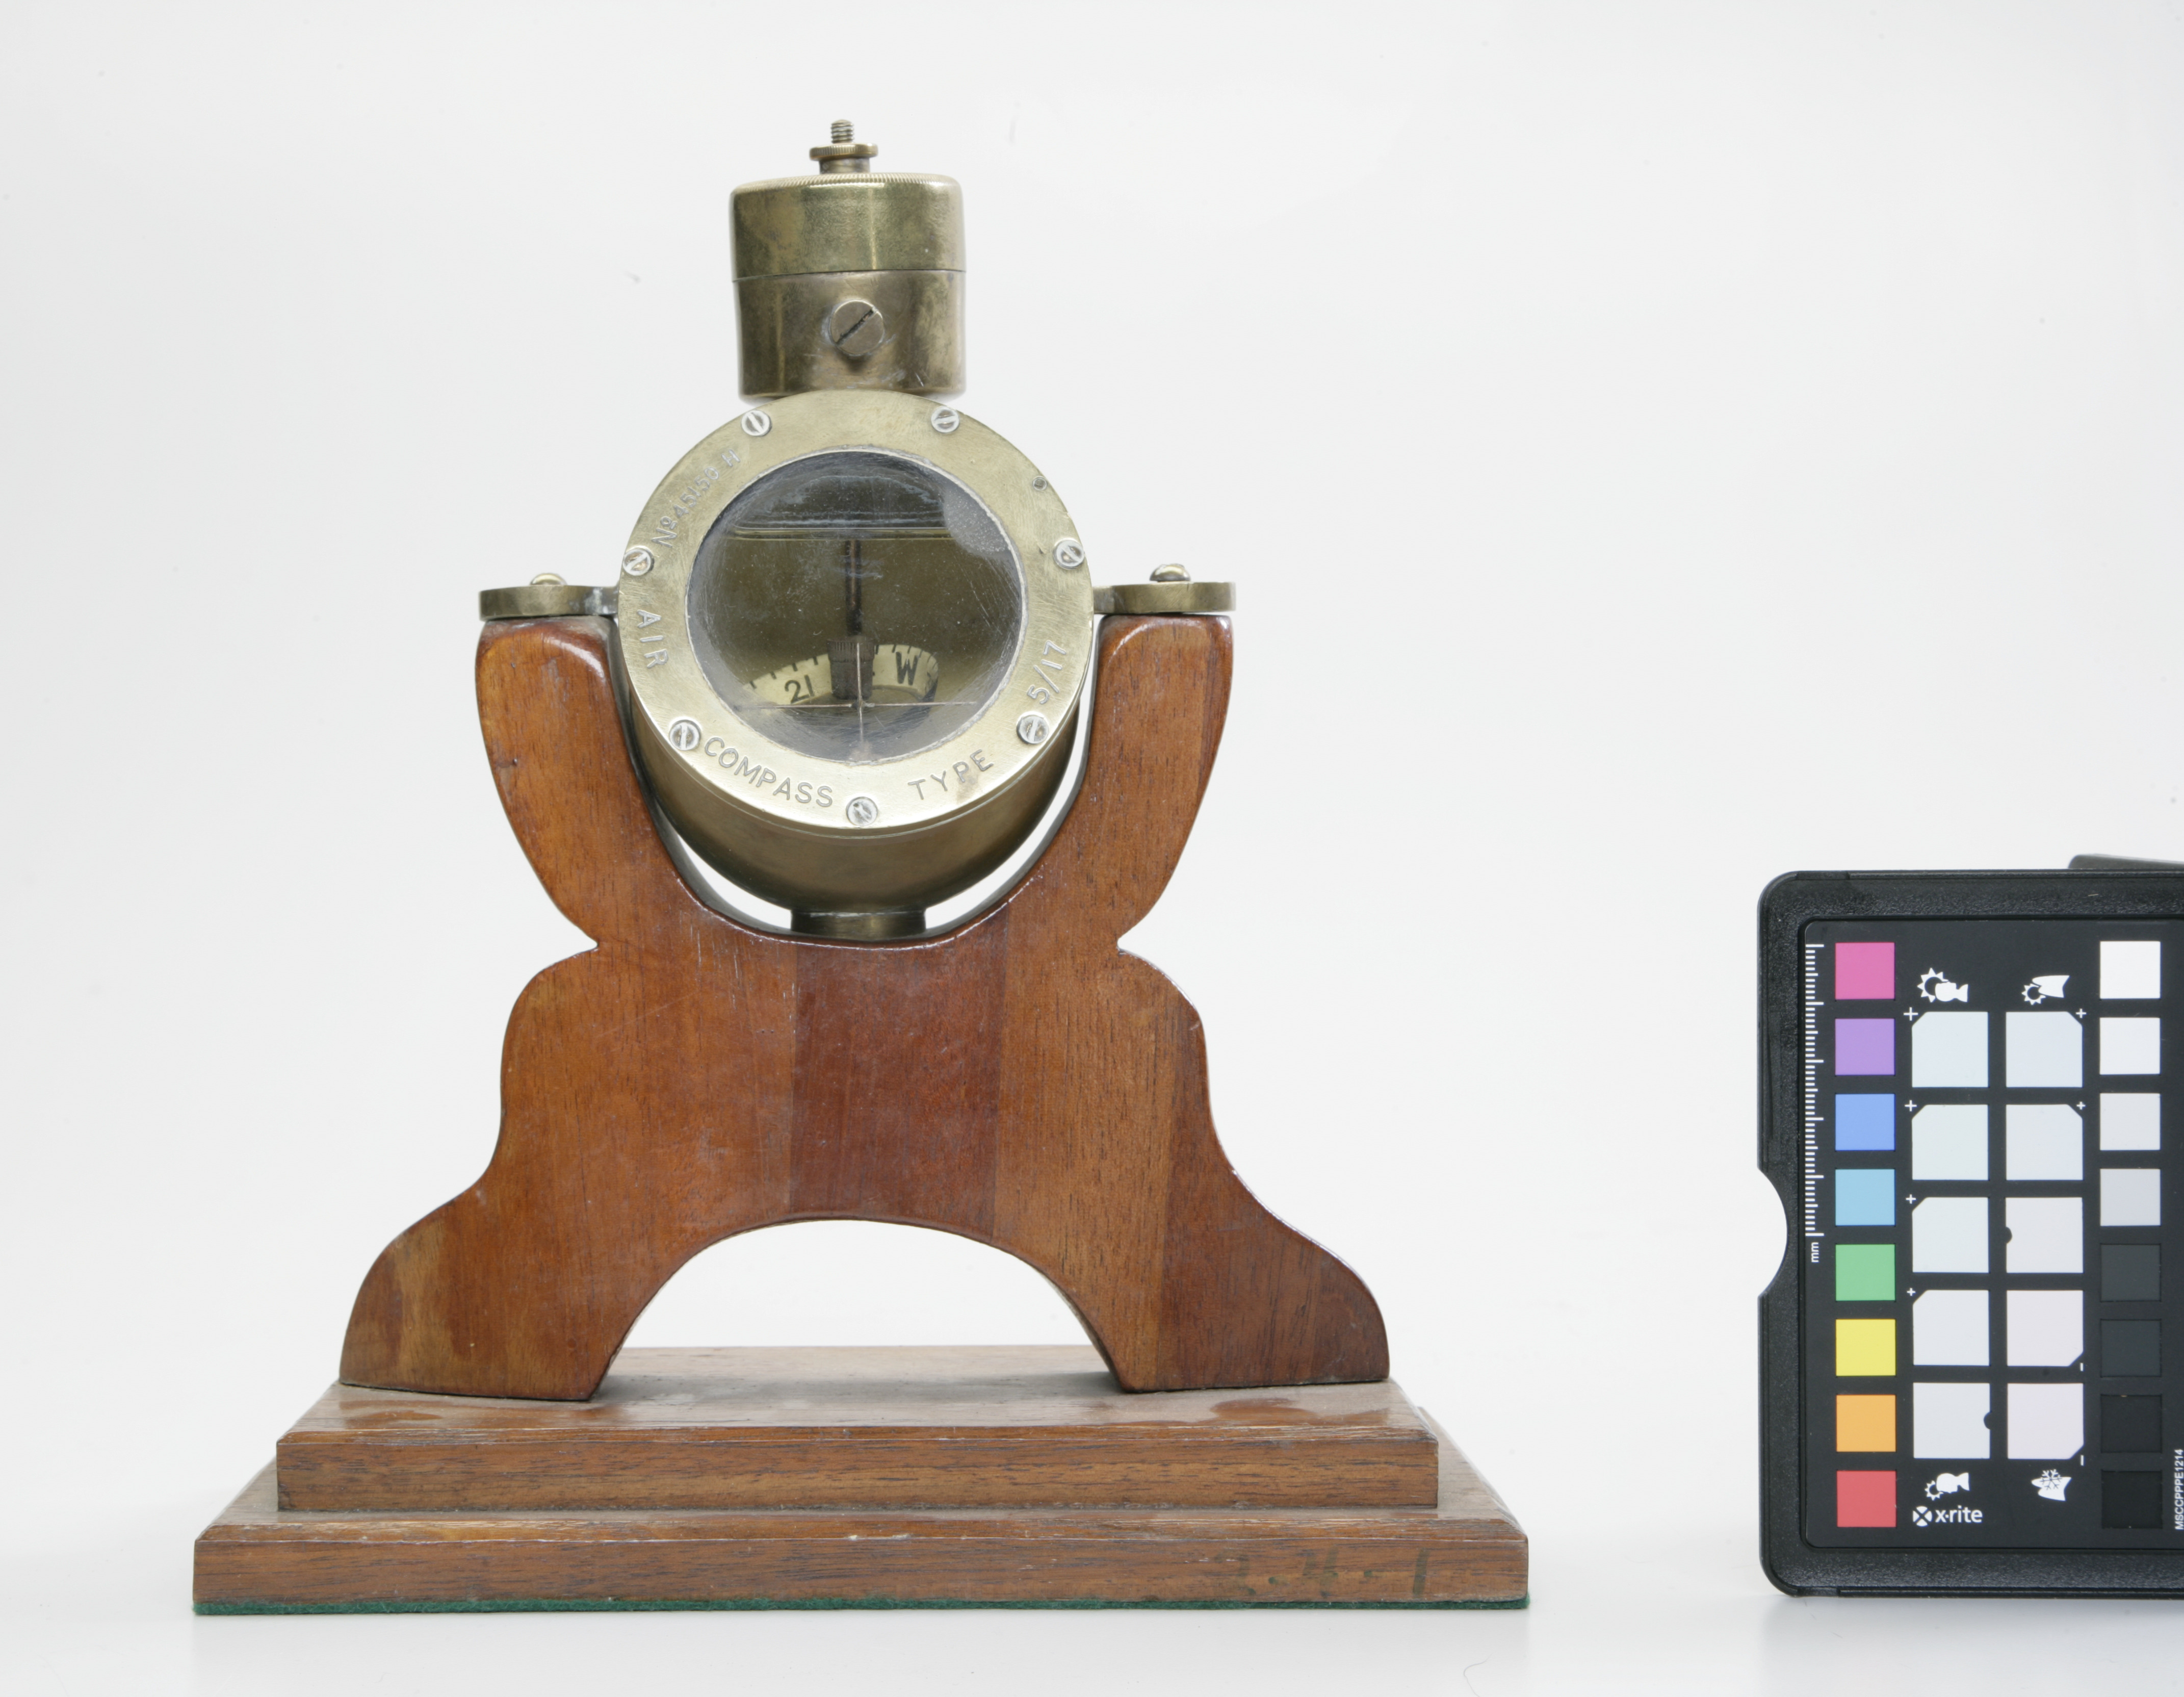 Antiqued Brass Compass and Clock with Hinged Lid – National Archives Store